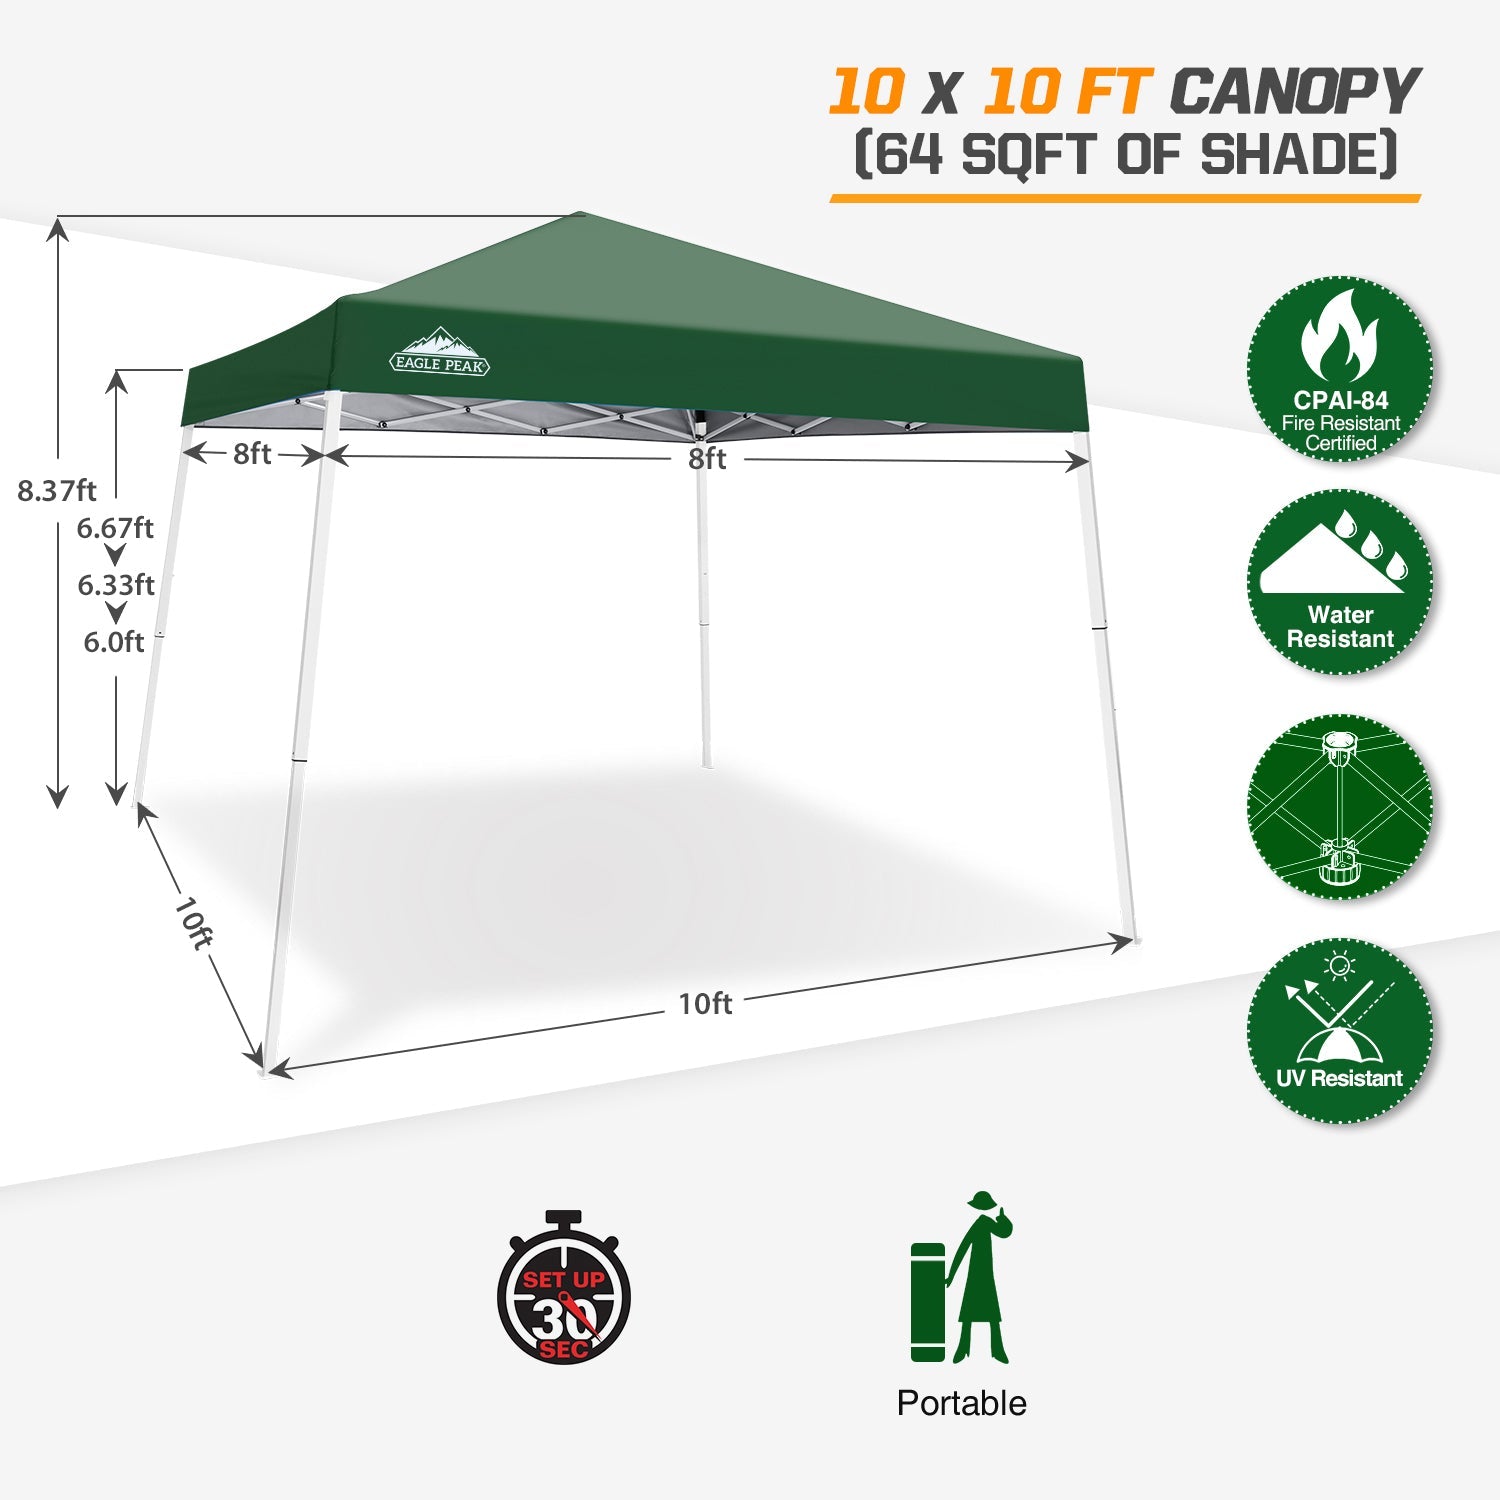 EAGLE PEAK 10' x 10' Slant Leg Pop-up Canopy Tent Easy One Person Setup Instant Outdoor Canopy Folding Shelter with 64 Square Feet of Shade (Green)